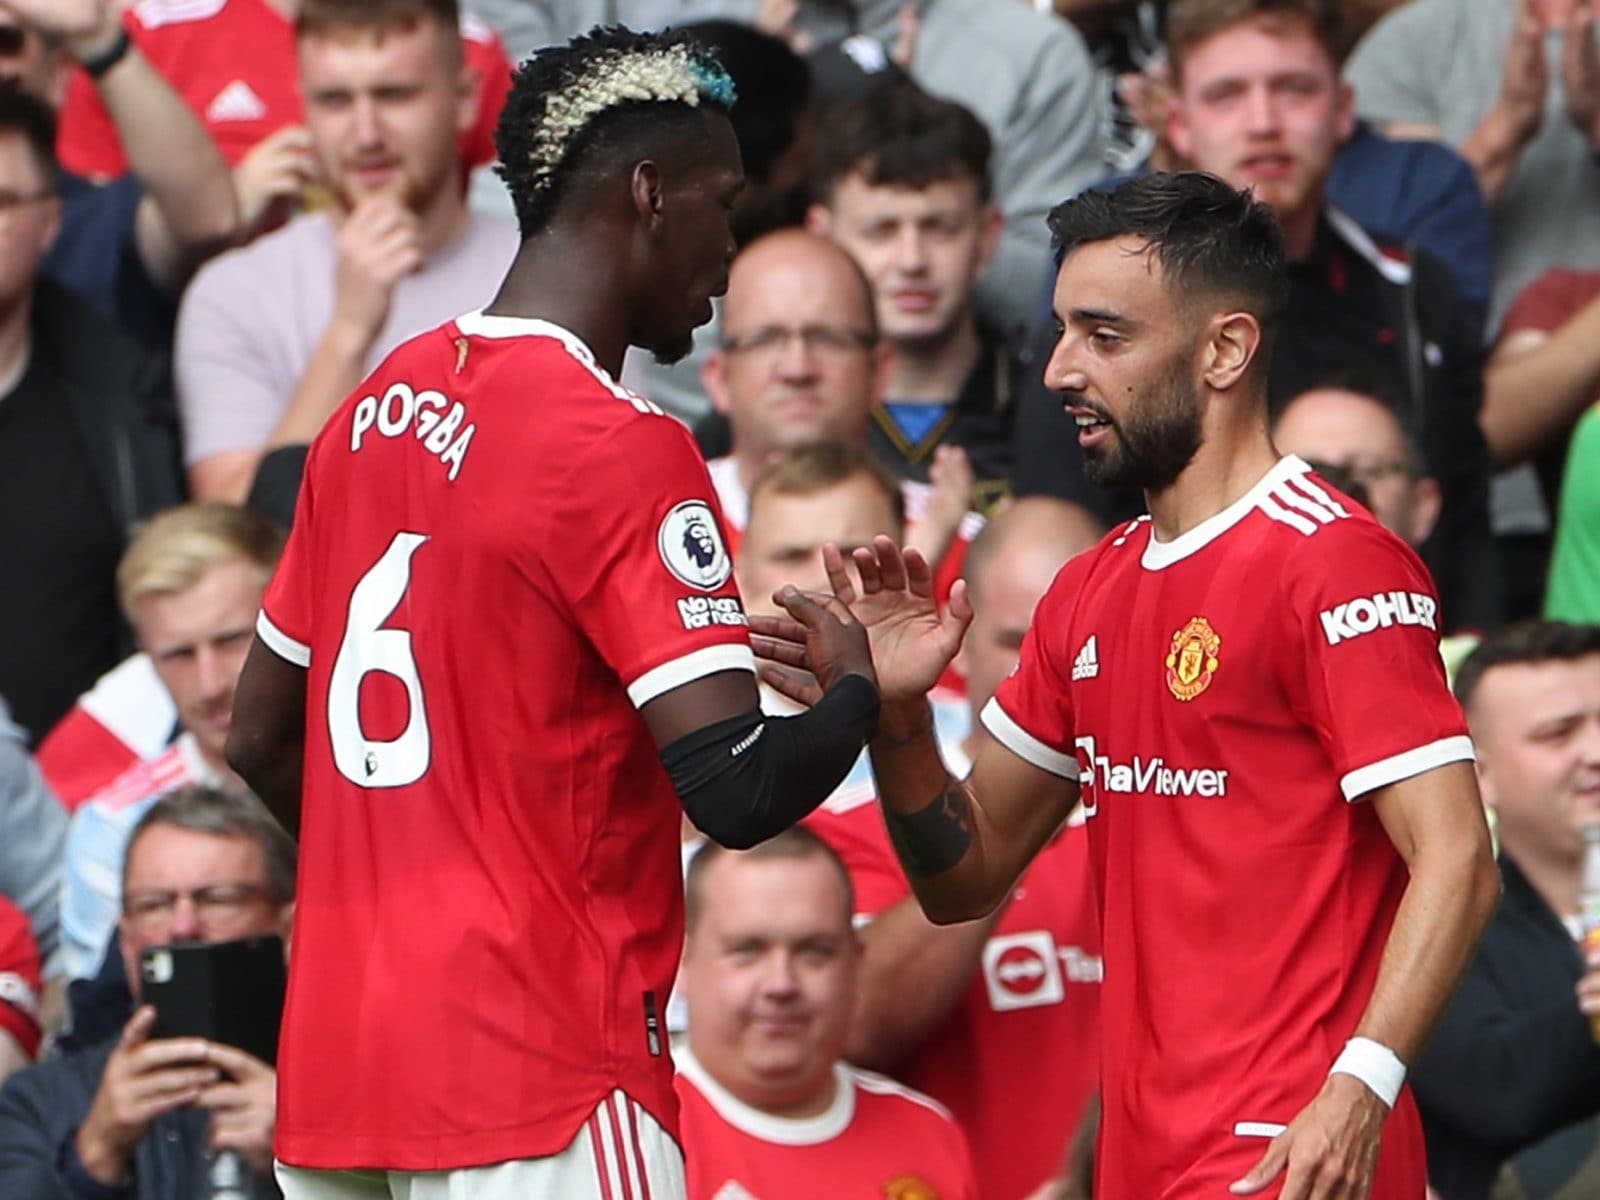 Paul Pogba is annoyed he isn't played in Bruno Fernandes' position